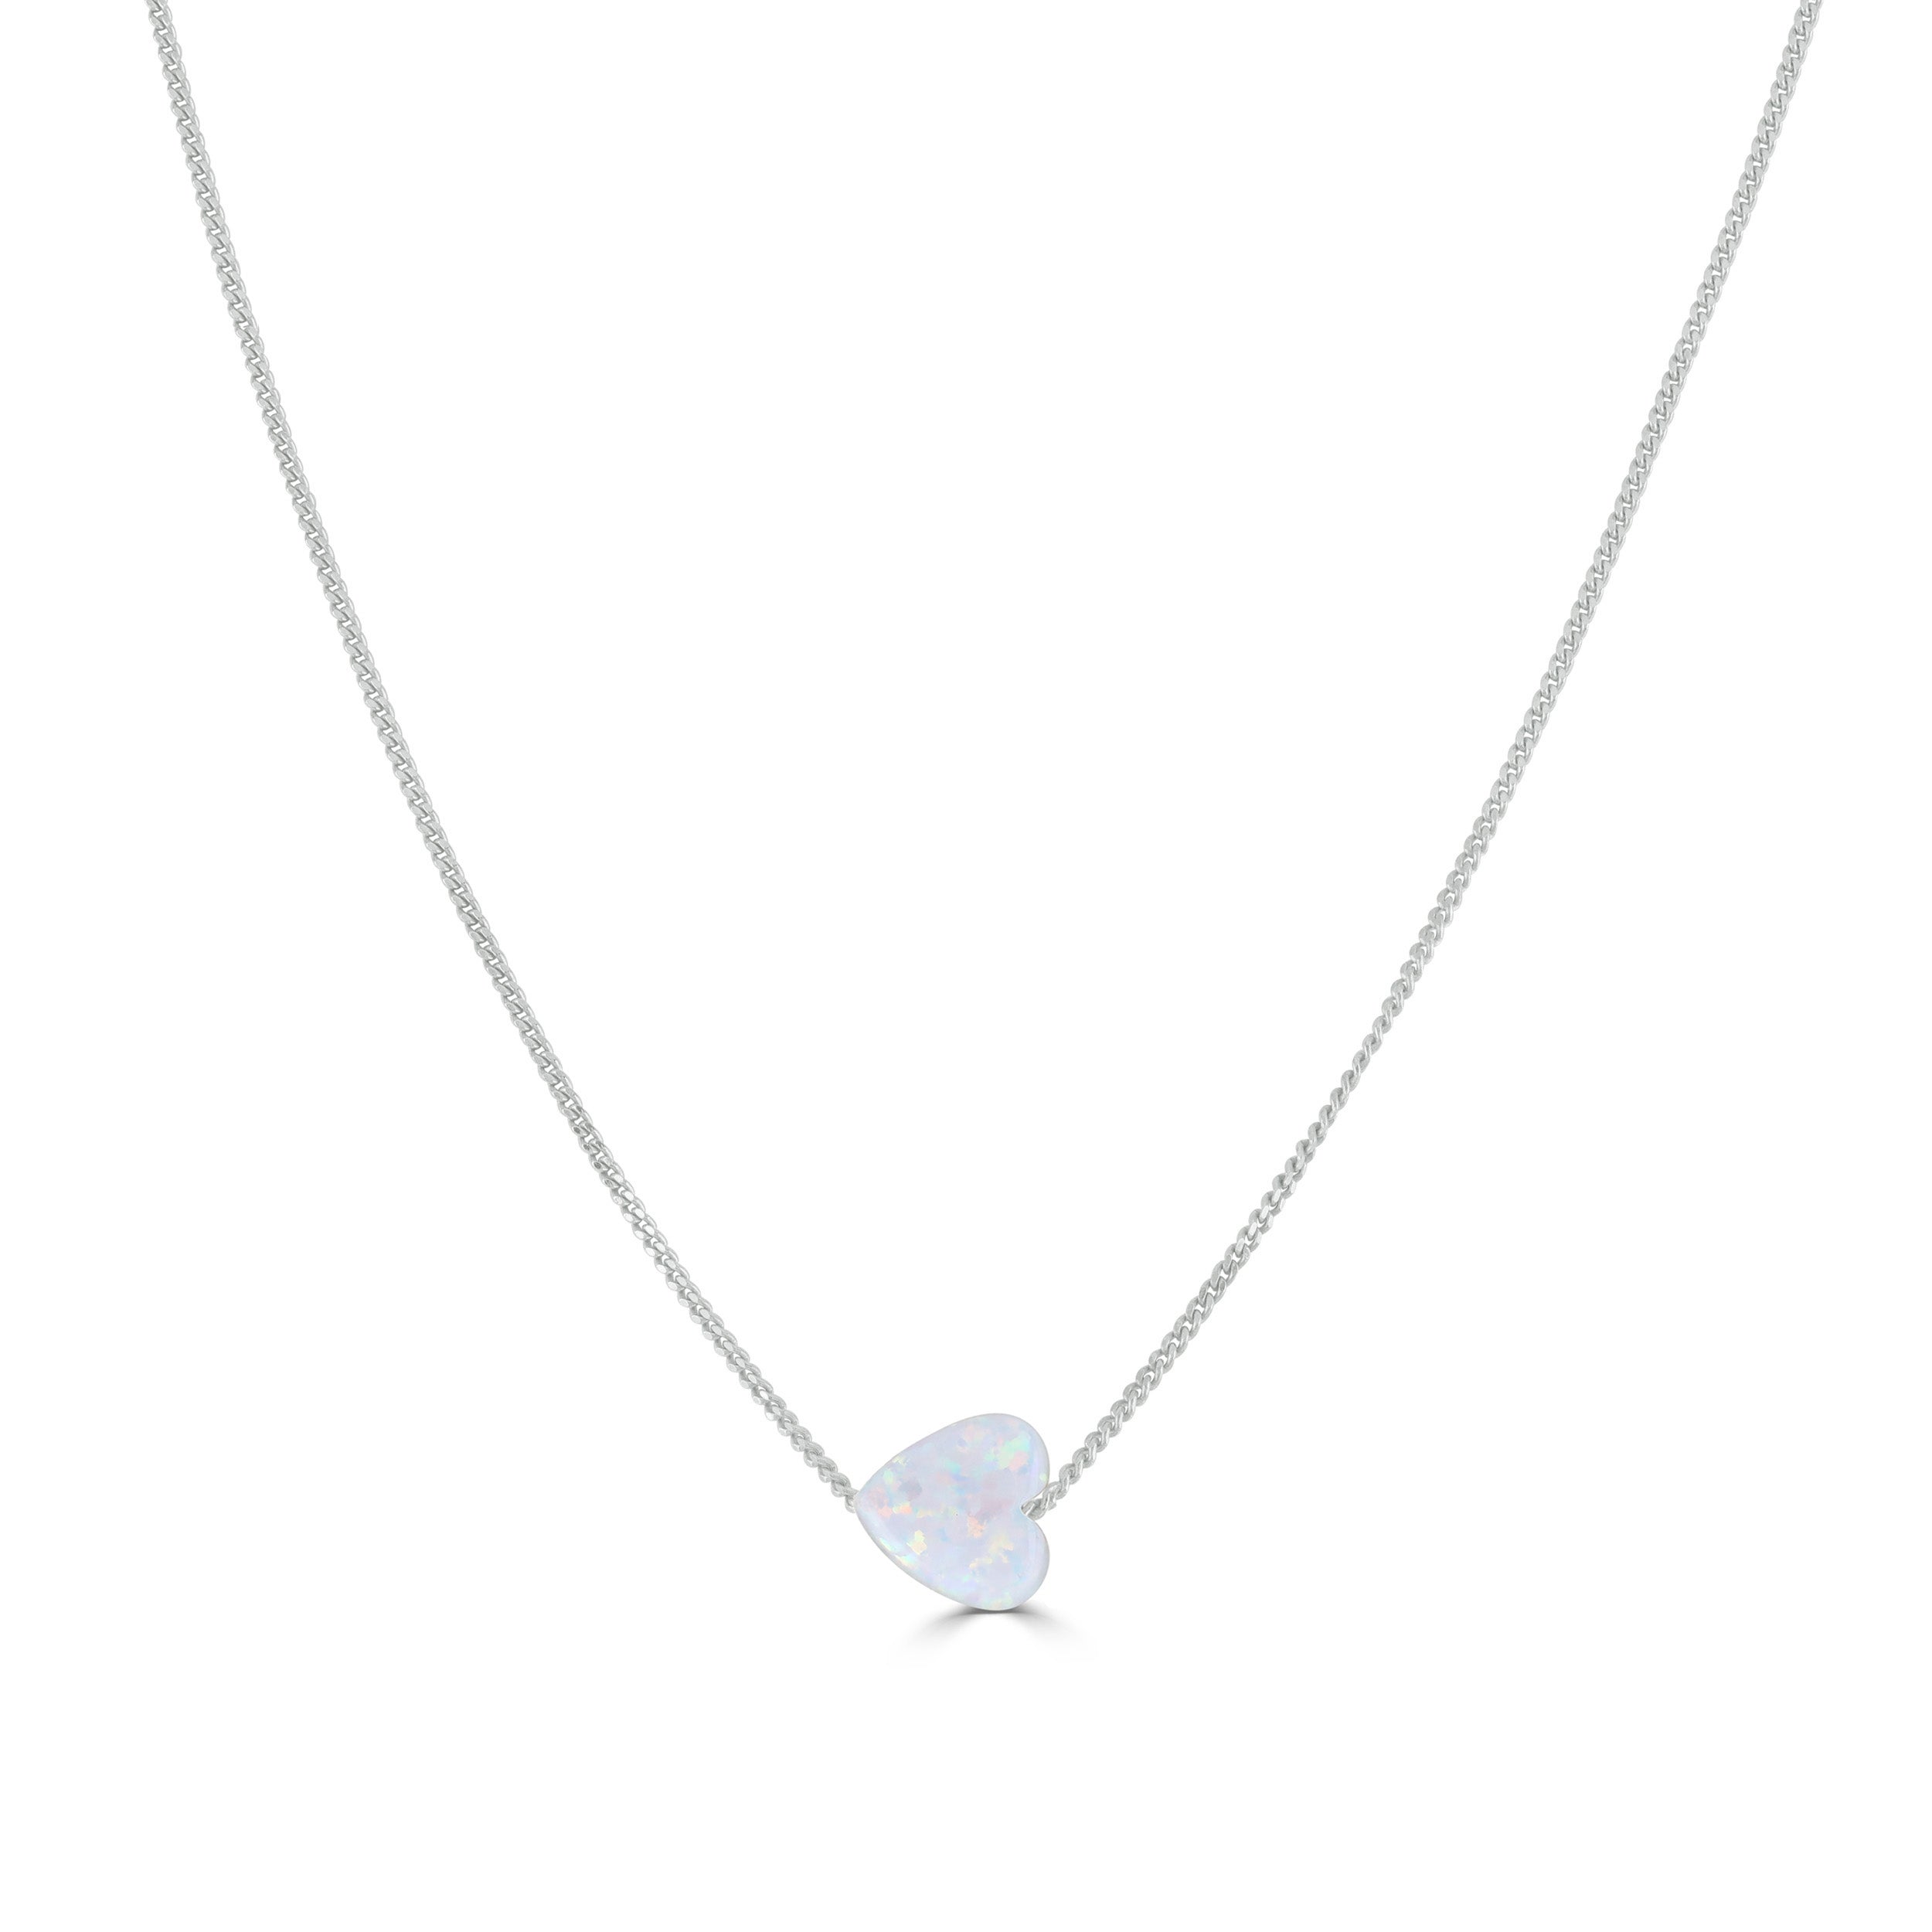 White Opal Heart Necklace Silver